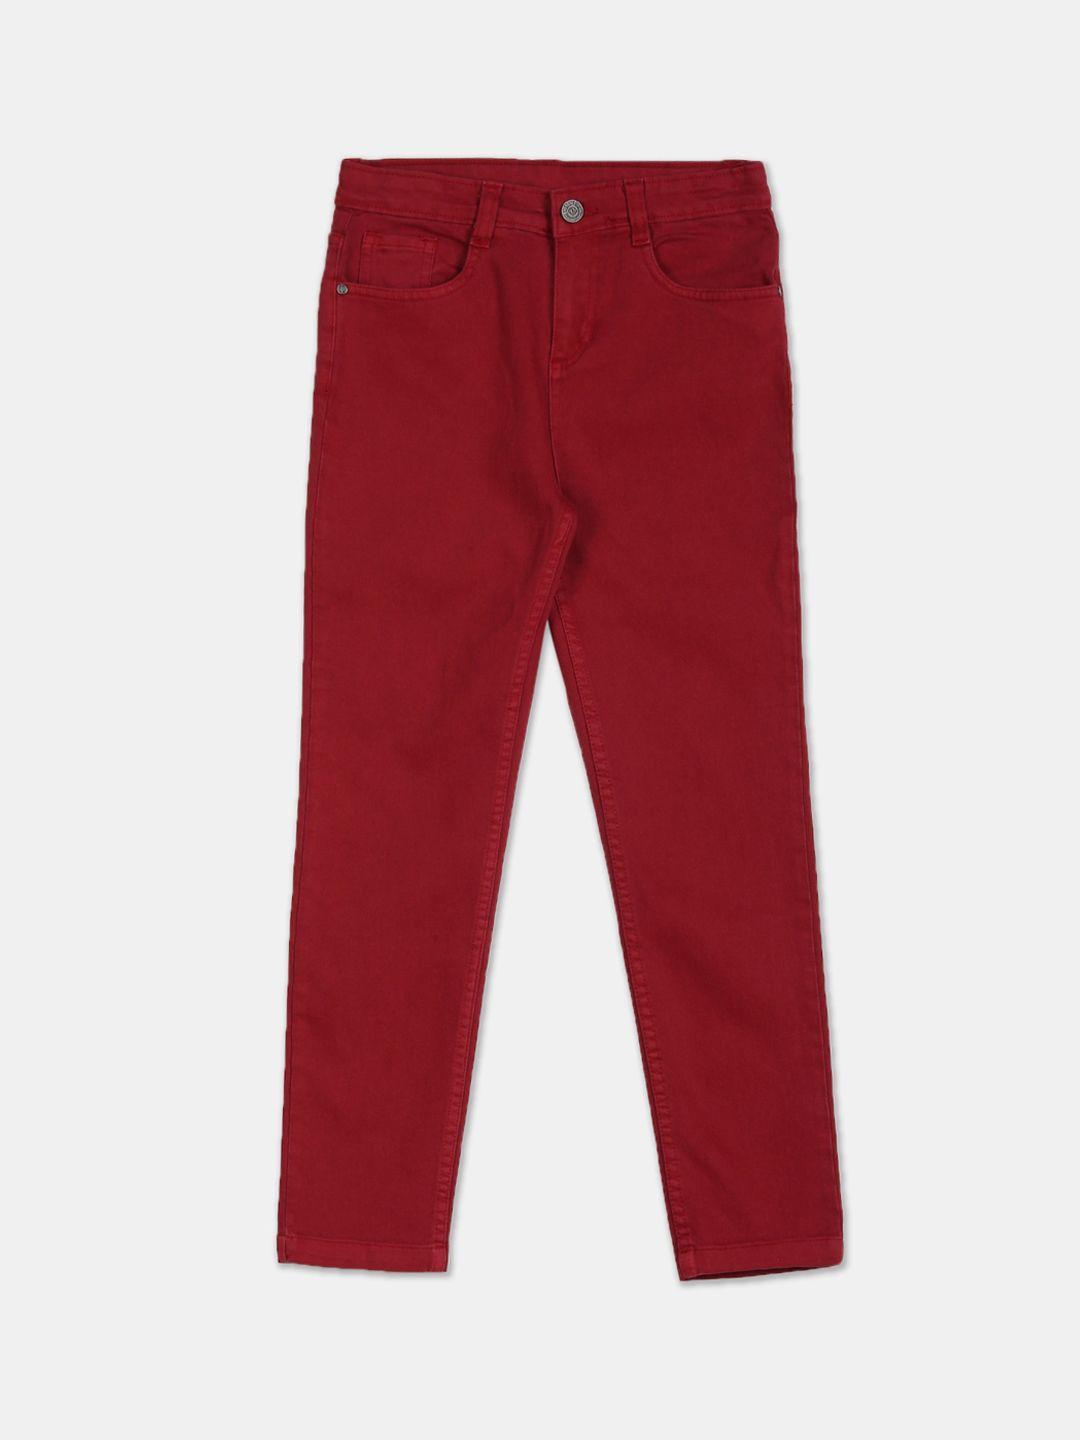 cherokee-boys-red-jeans